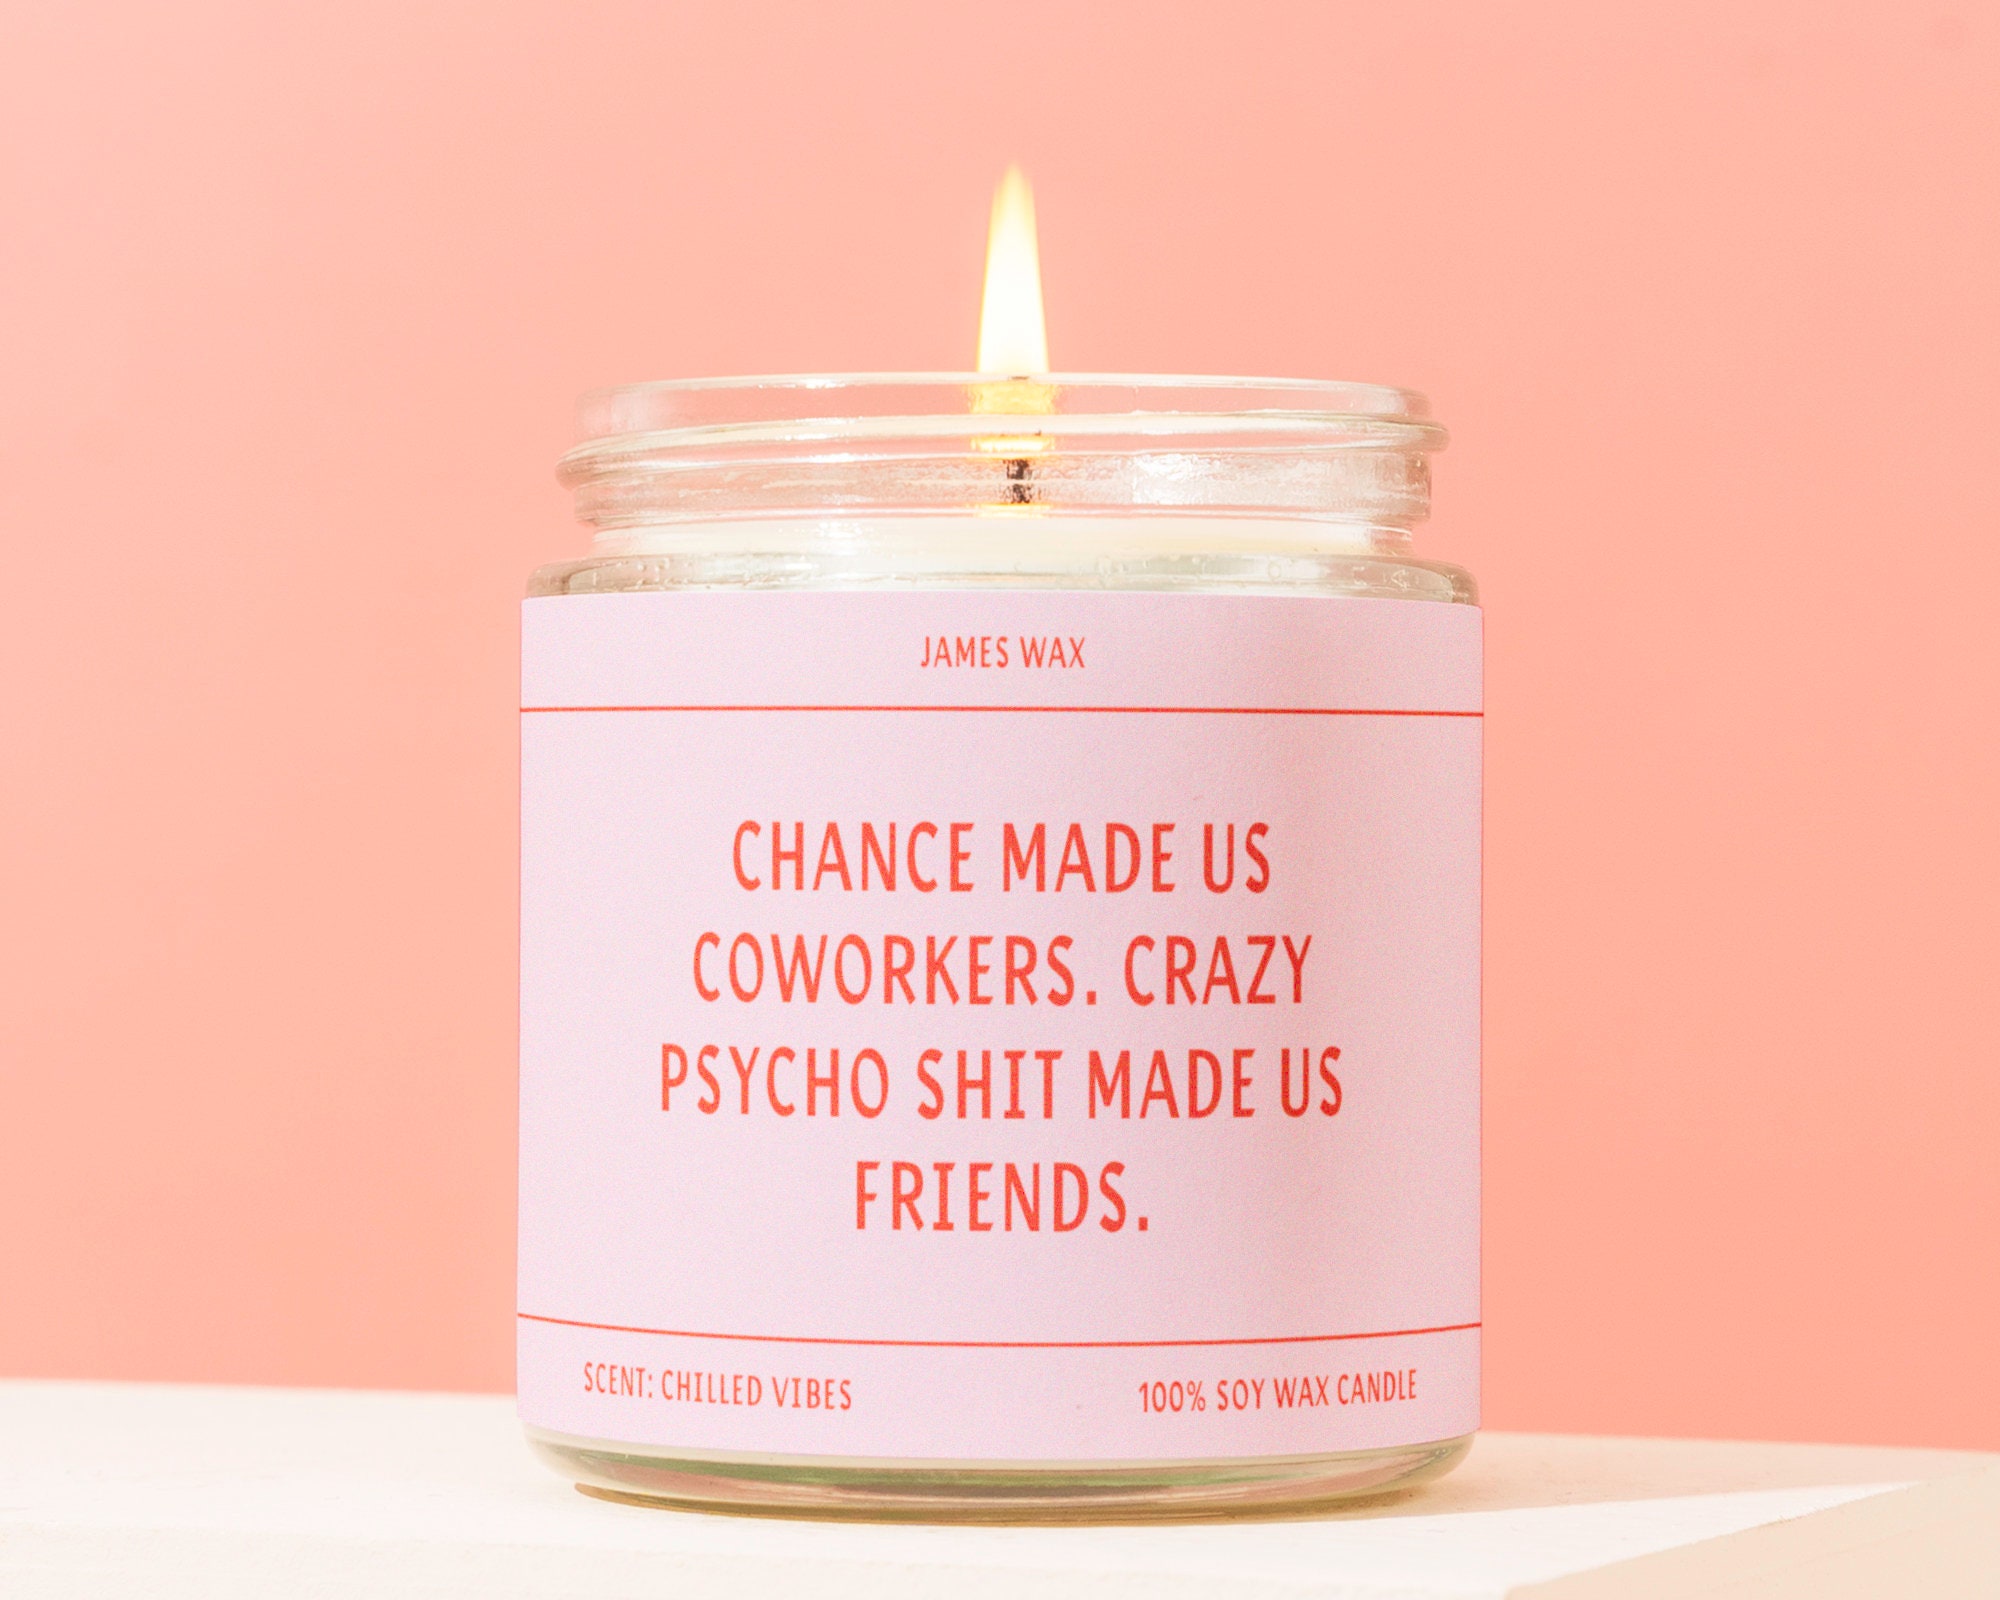 Candles - Chance Made Us Coworkers. Crazy Psycho Shit Made Us